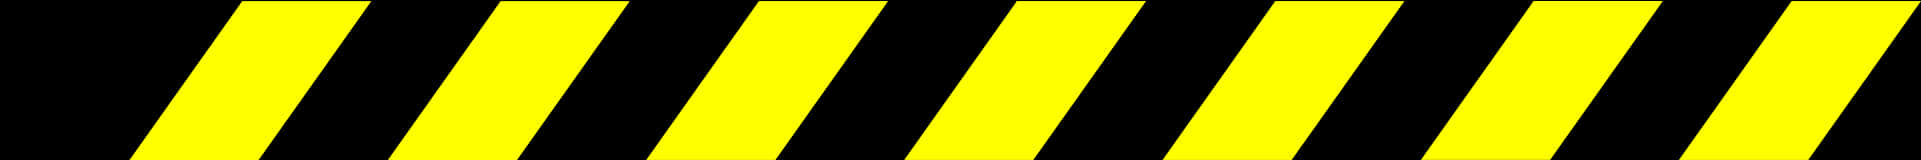 Yellow Black Striped Caution Tape Background